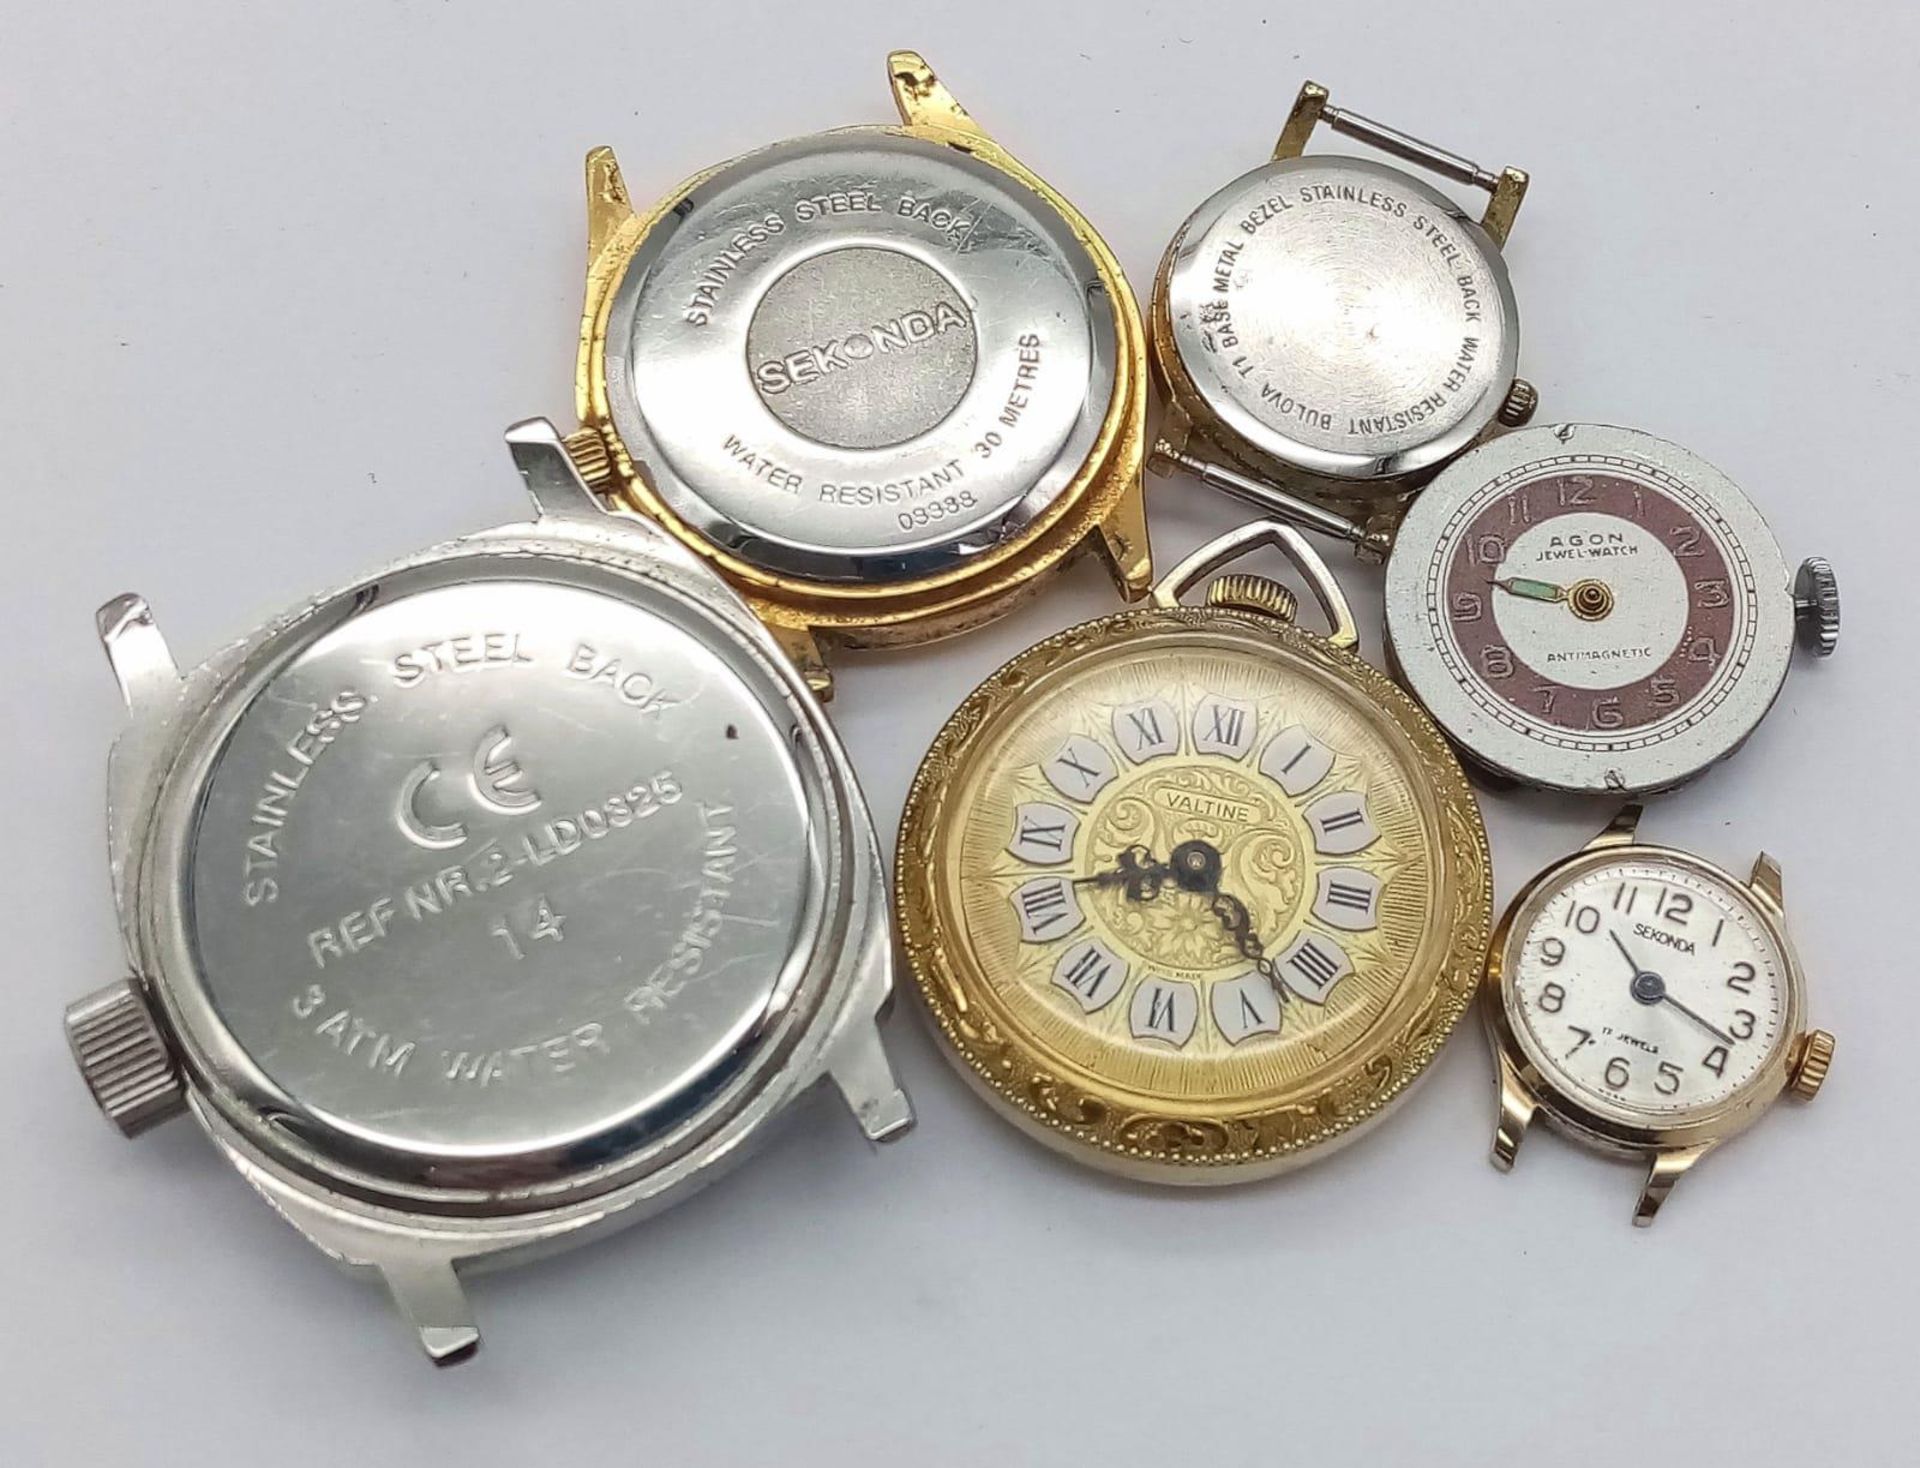 18 Watch Cases with Movements PLUS Nine Loose Watch Movements. Great for spare parts. - Image 3 of 3